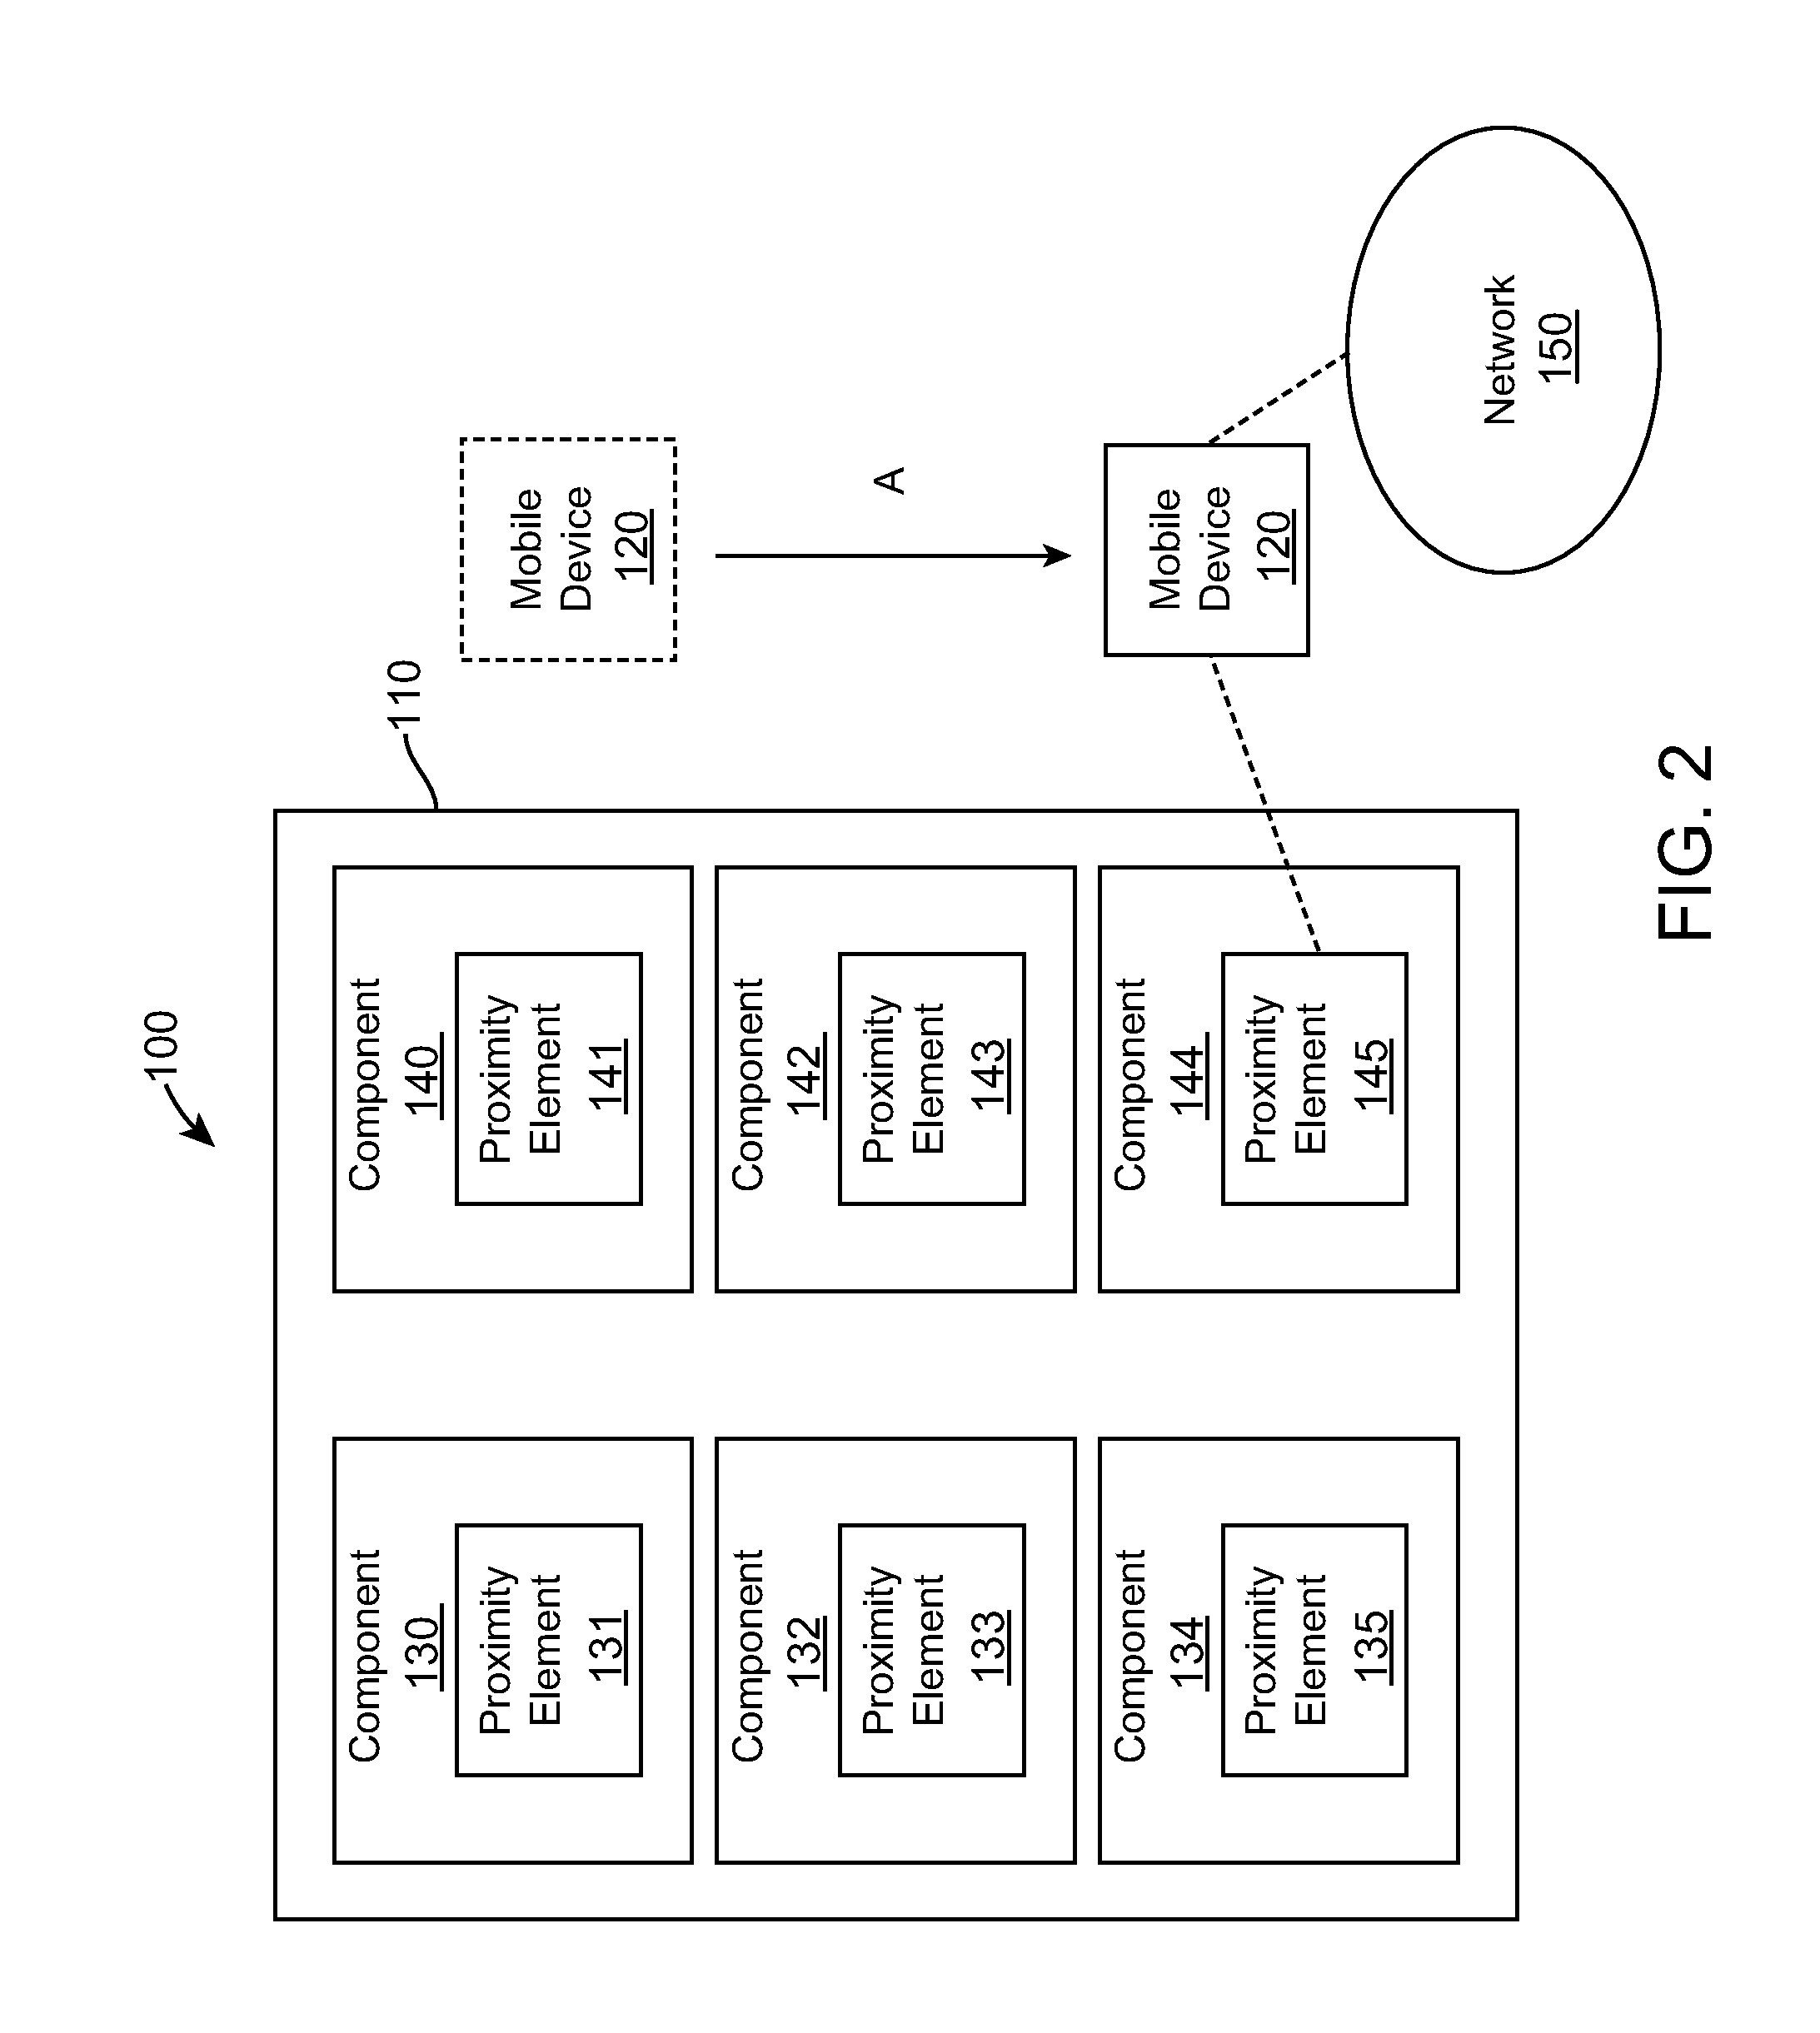 Content identification and retrieval based on device component proximity